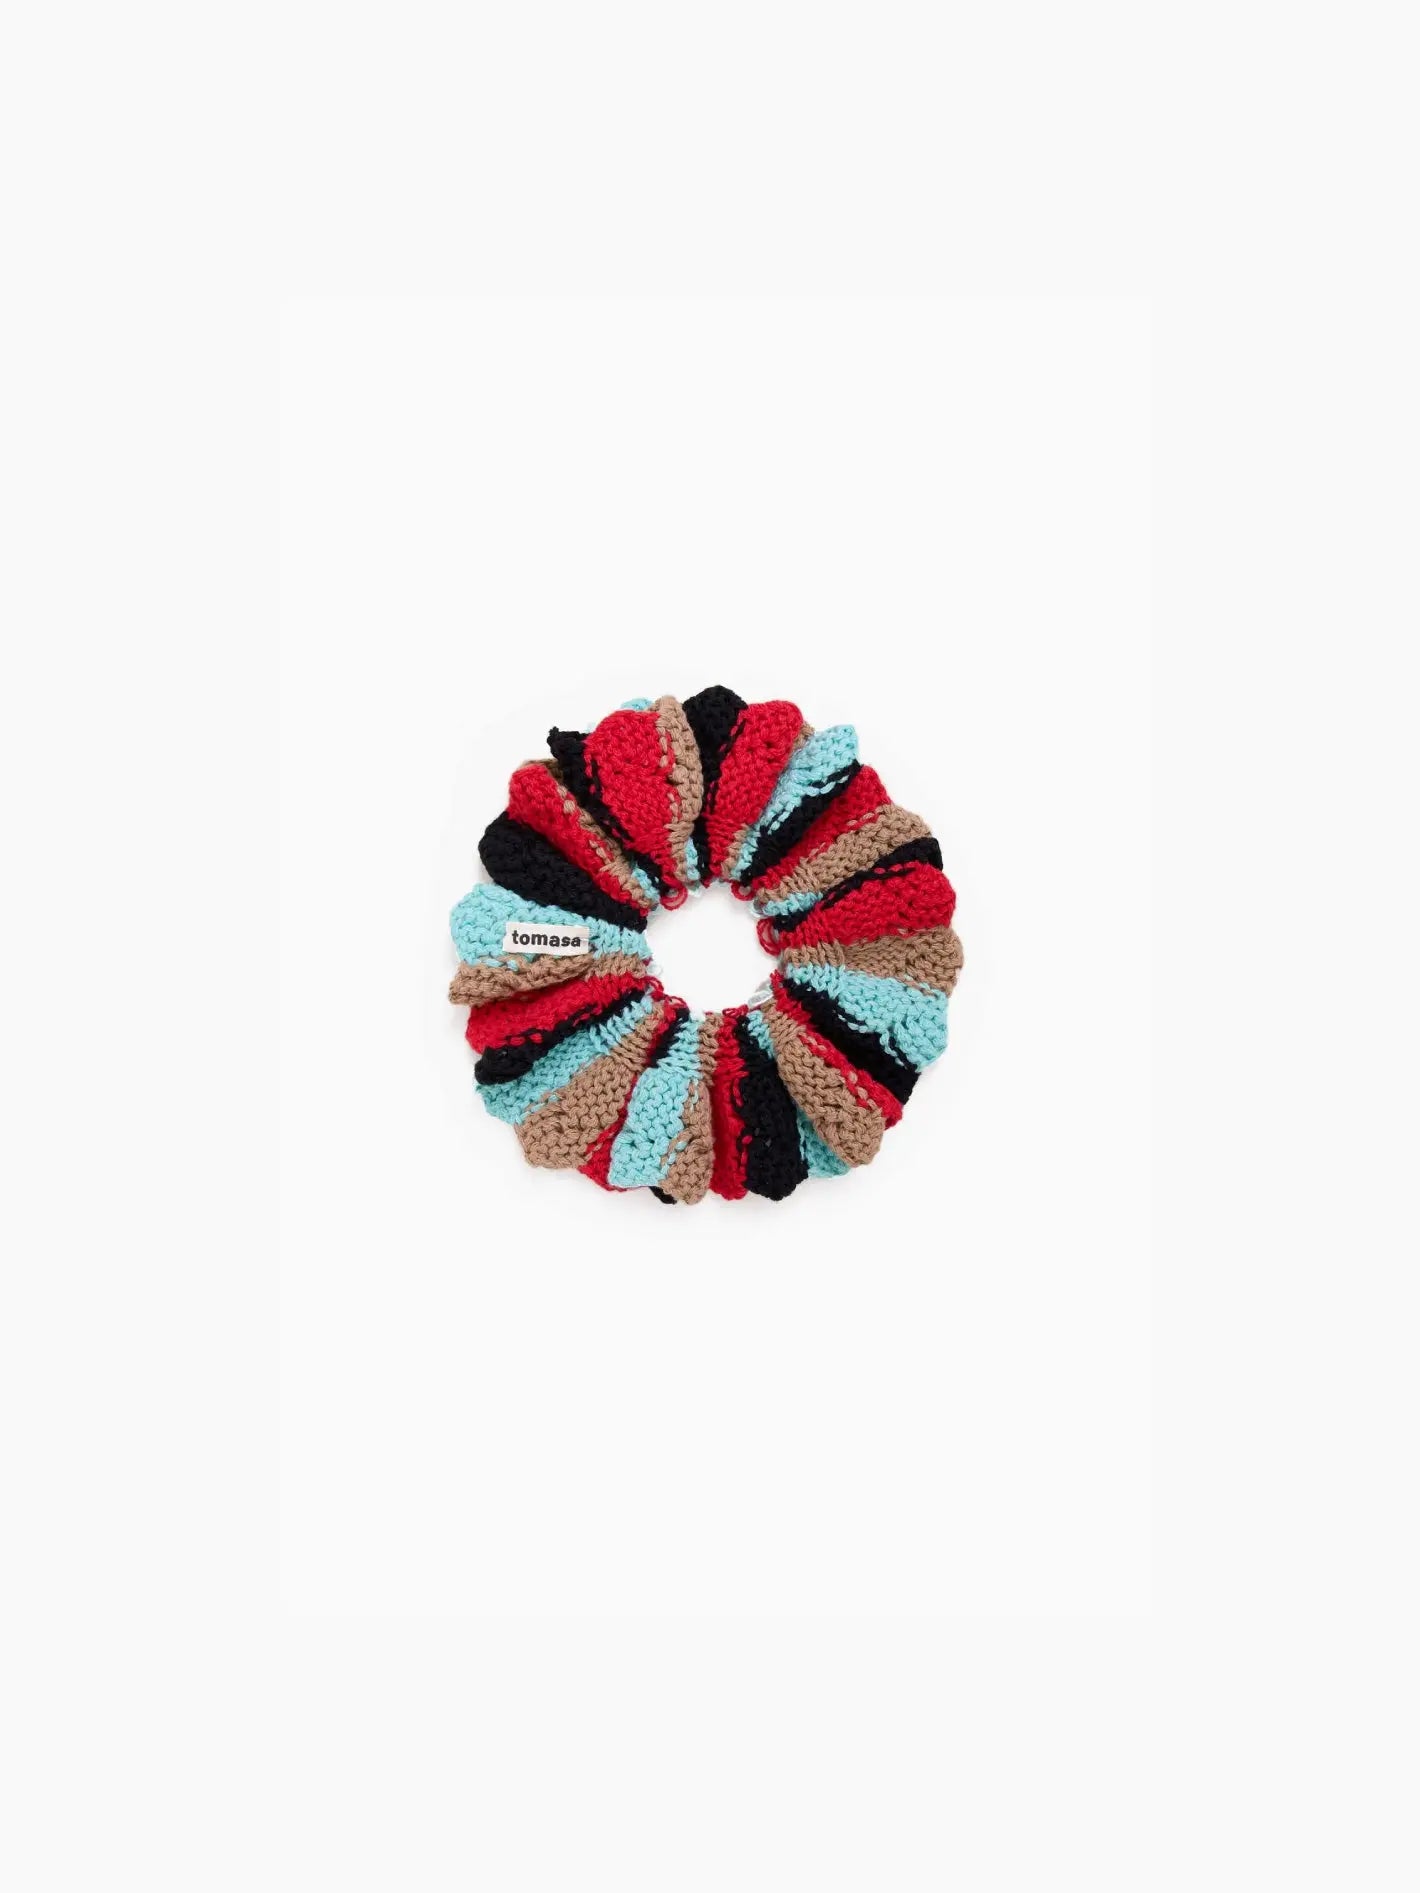 A multicolored, crocheted Fernandita Scrunchie Berber made up of alternating segments in red, black, blue, and beige. It is circular and has a visible fabric brand tag labeled "Tomasa." Available at bassalstore in Barcelona. The background is plain white.